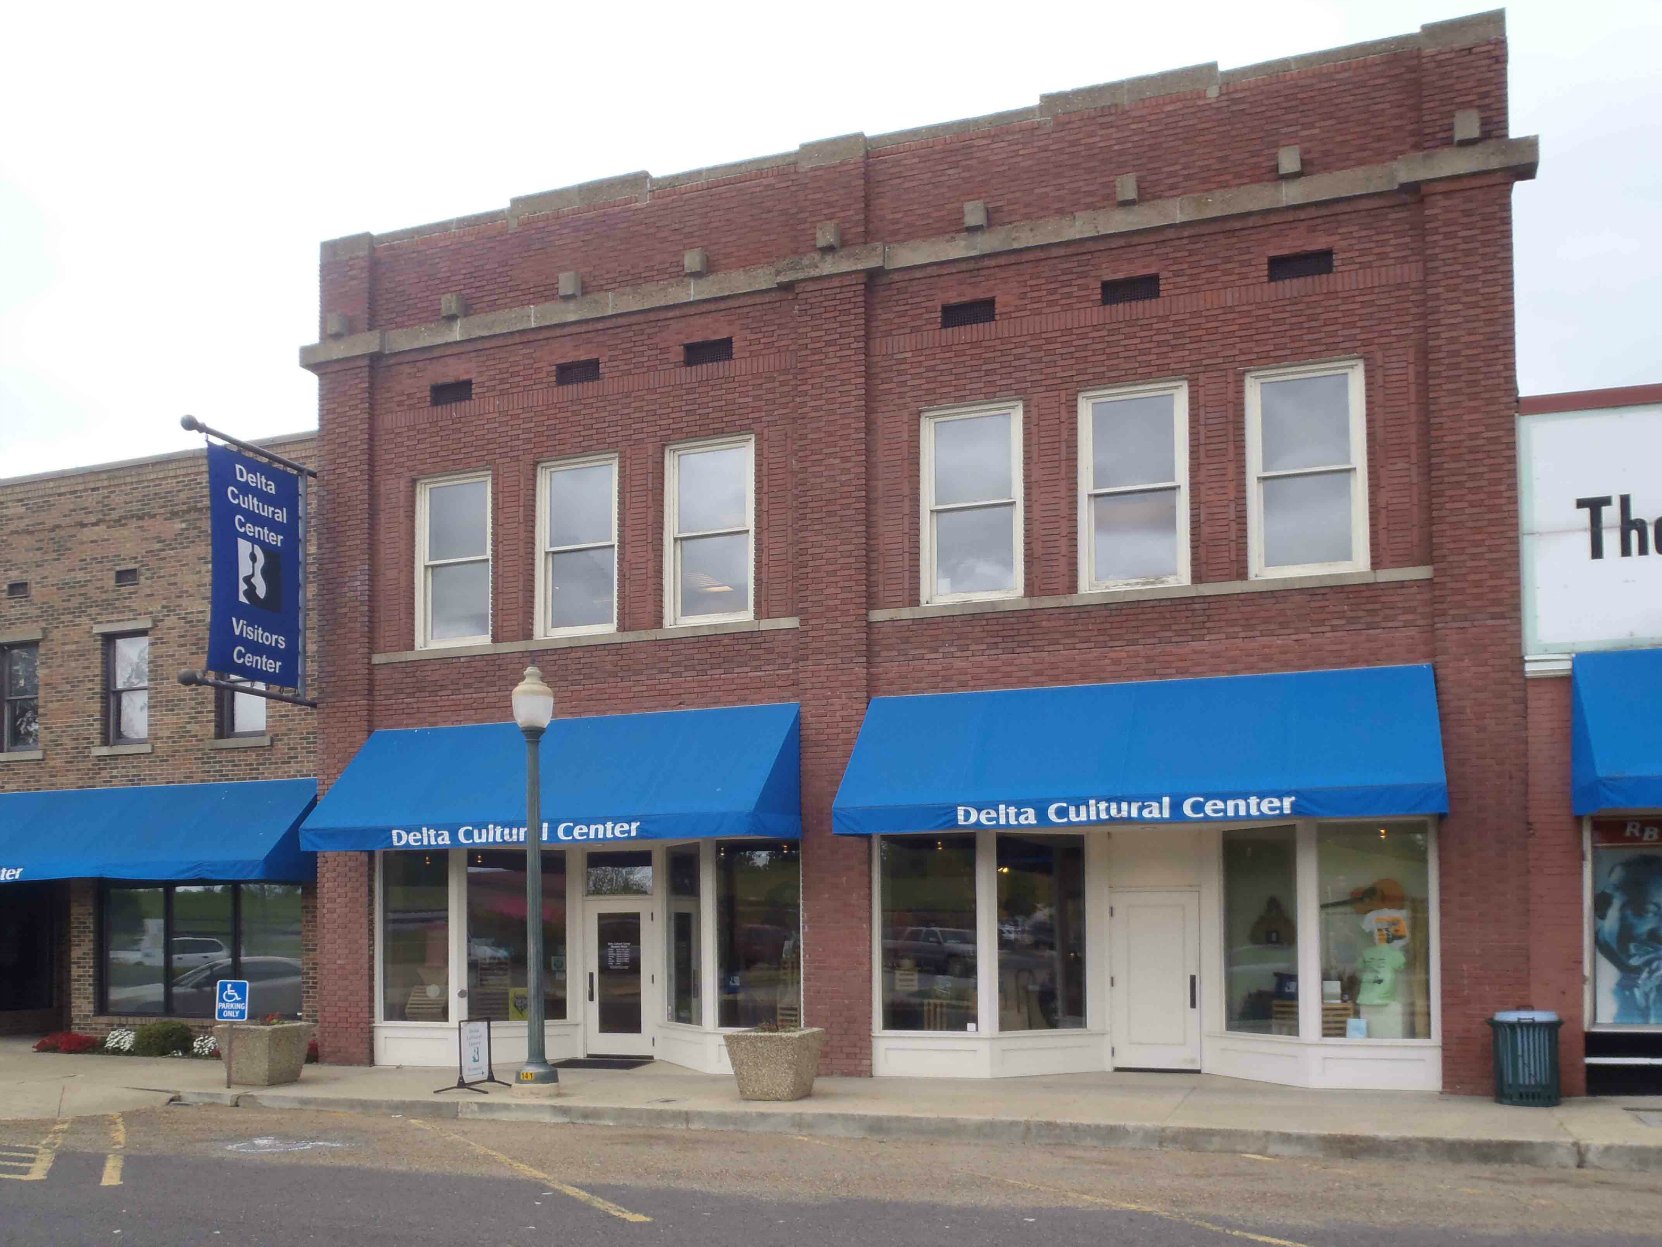 This building is now part of the Delta Cultural center on Cherry Street in downtown Helena, Arkansas